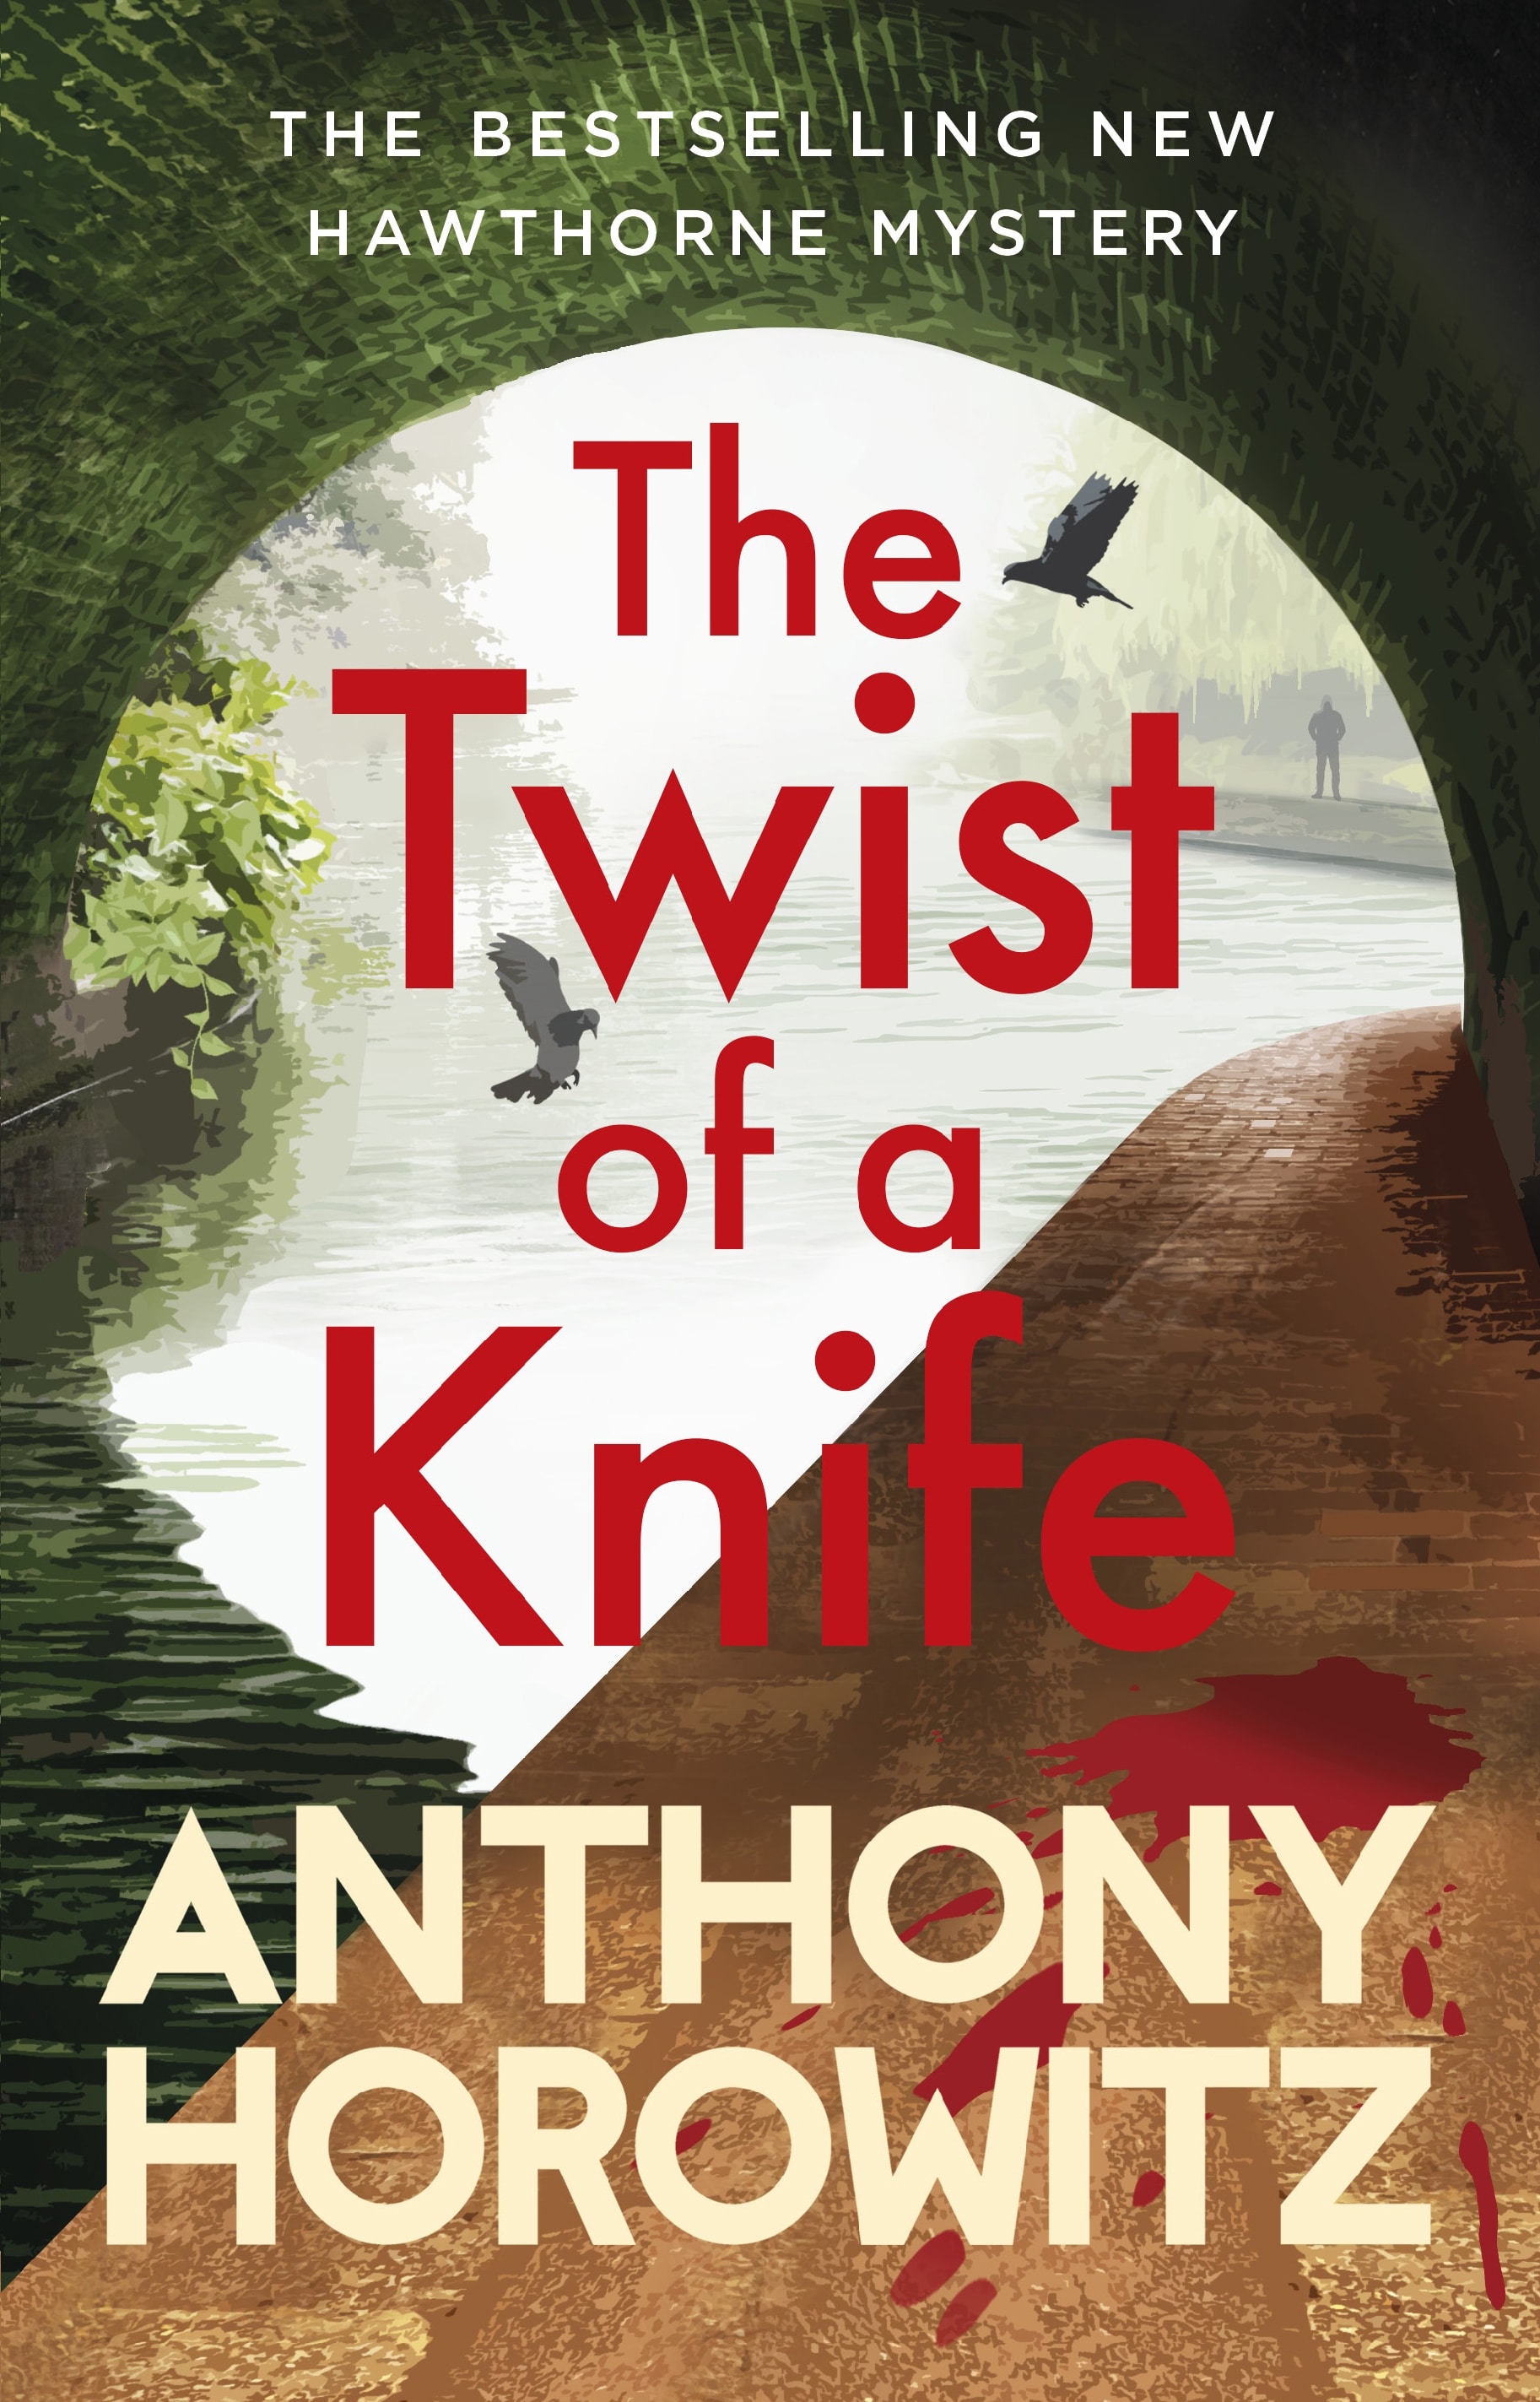 Book cover of The Twist of a Knife by Anthony Horowitz, book 4 in the Hawthorne and Horowitz series